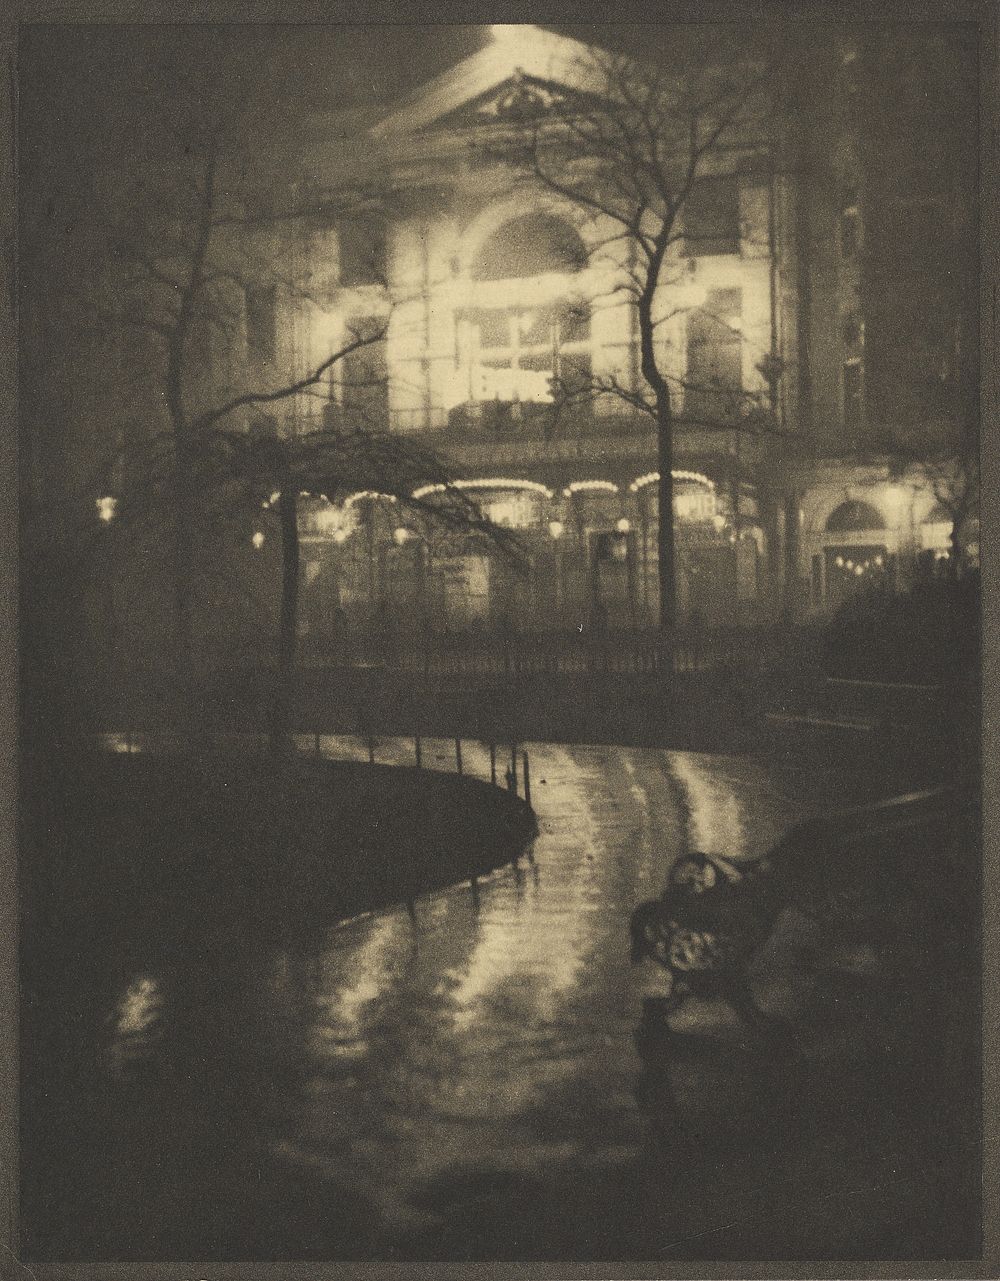 Leicester Square, London, England by Alvin Langdon Coburn